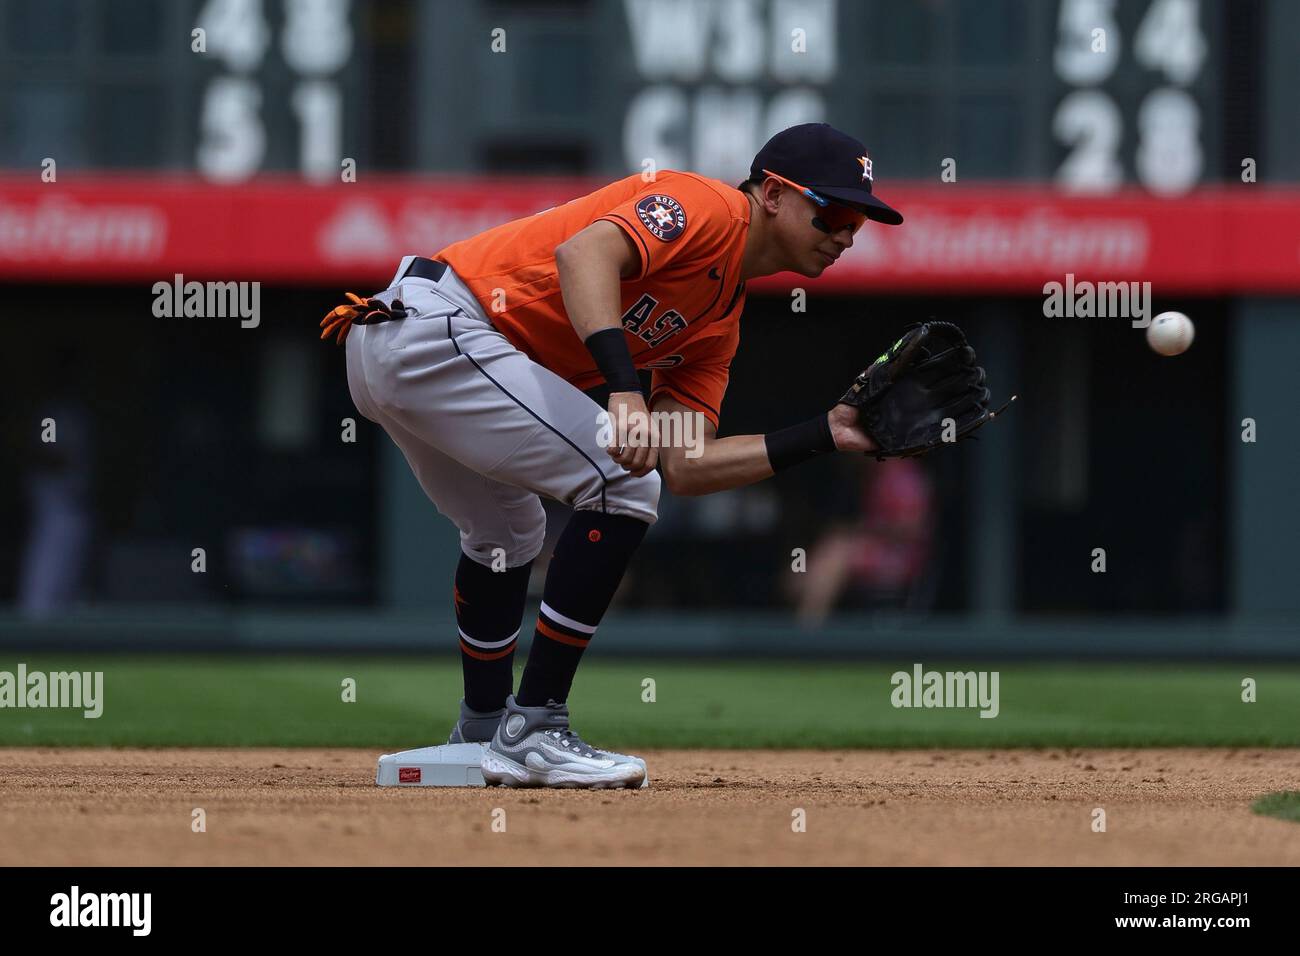 Houston Astros second baseman Mauricio Dubon (14) catches the ball at  second base in an MLB game against the Colorado Rockies. The Astros  defeated the Rockies 4-1, Wednesday, July 19, 2023, in